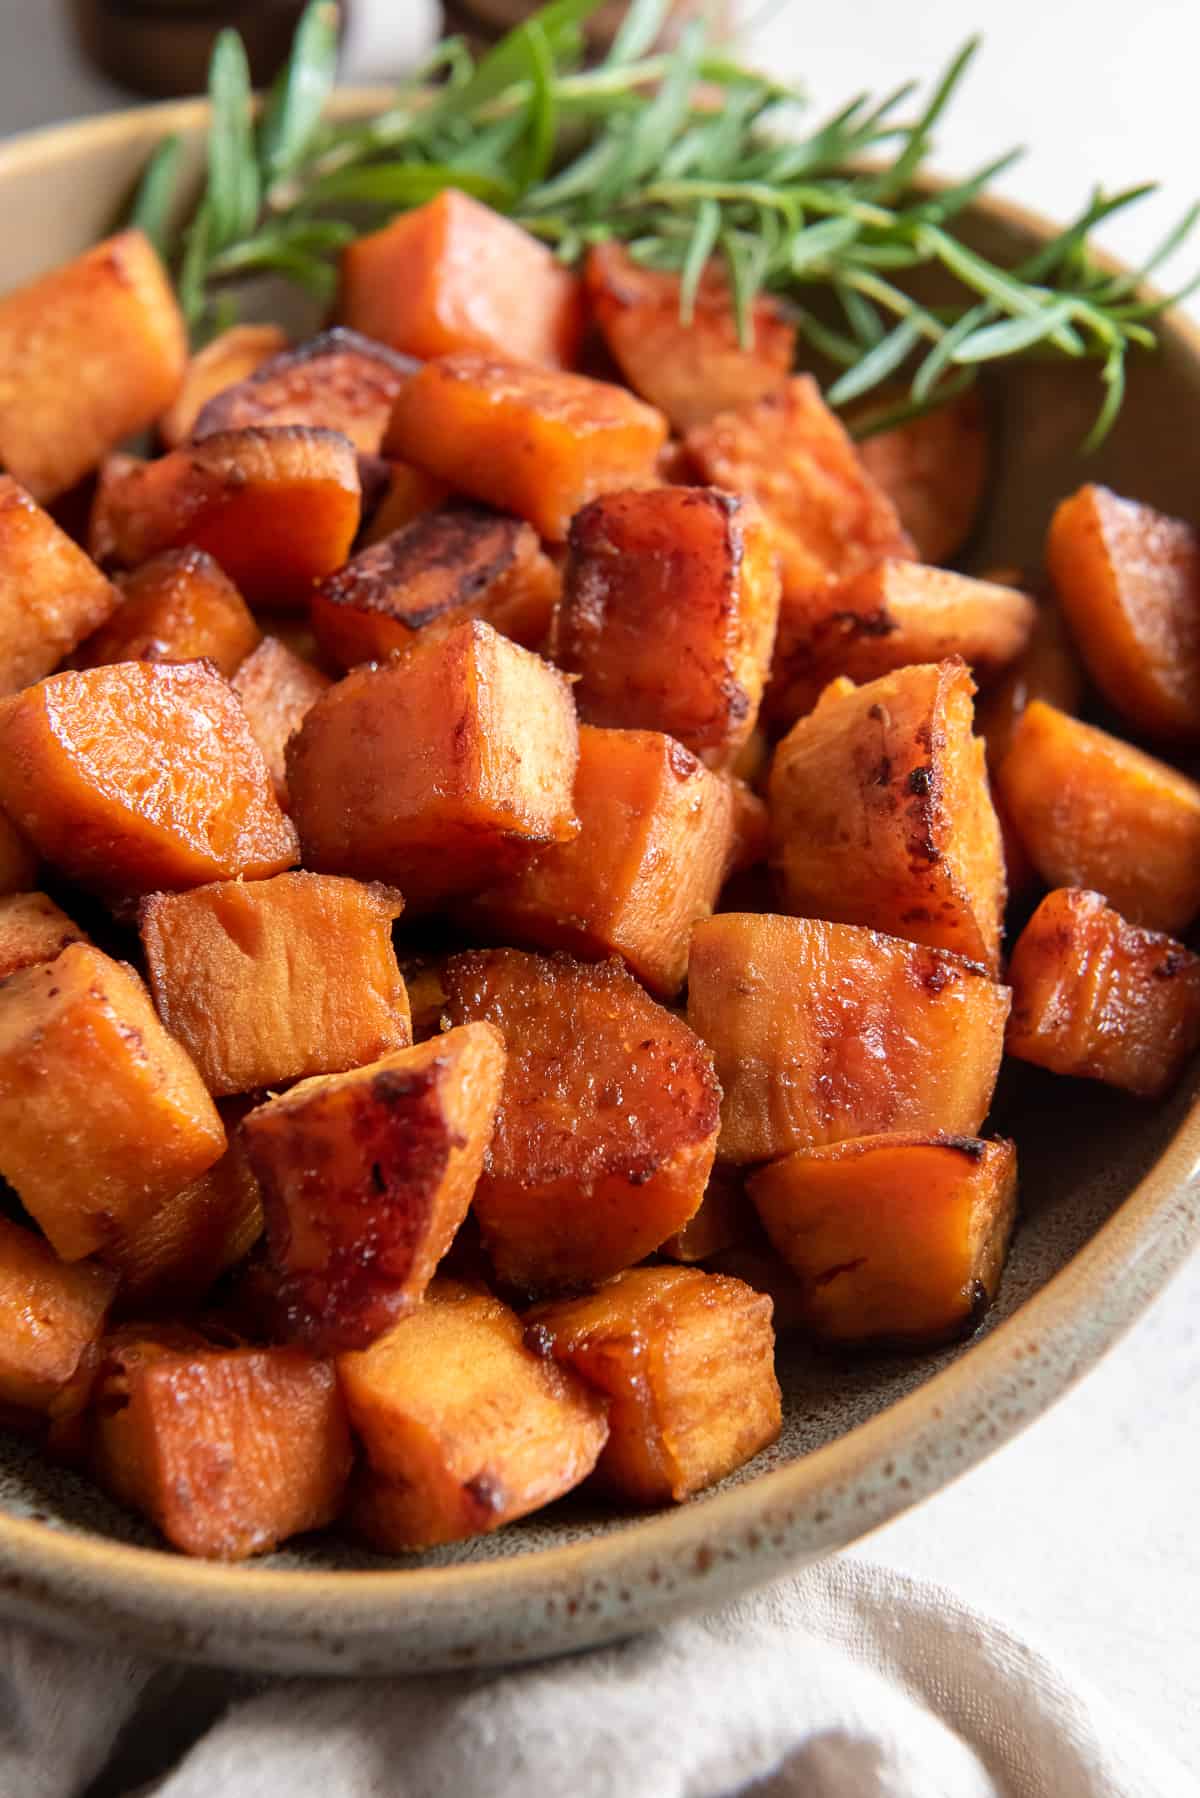 Chunks of roasted sweet potato in a serving bowl with a sprig of rosemary.